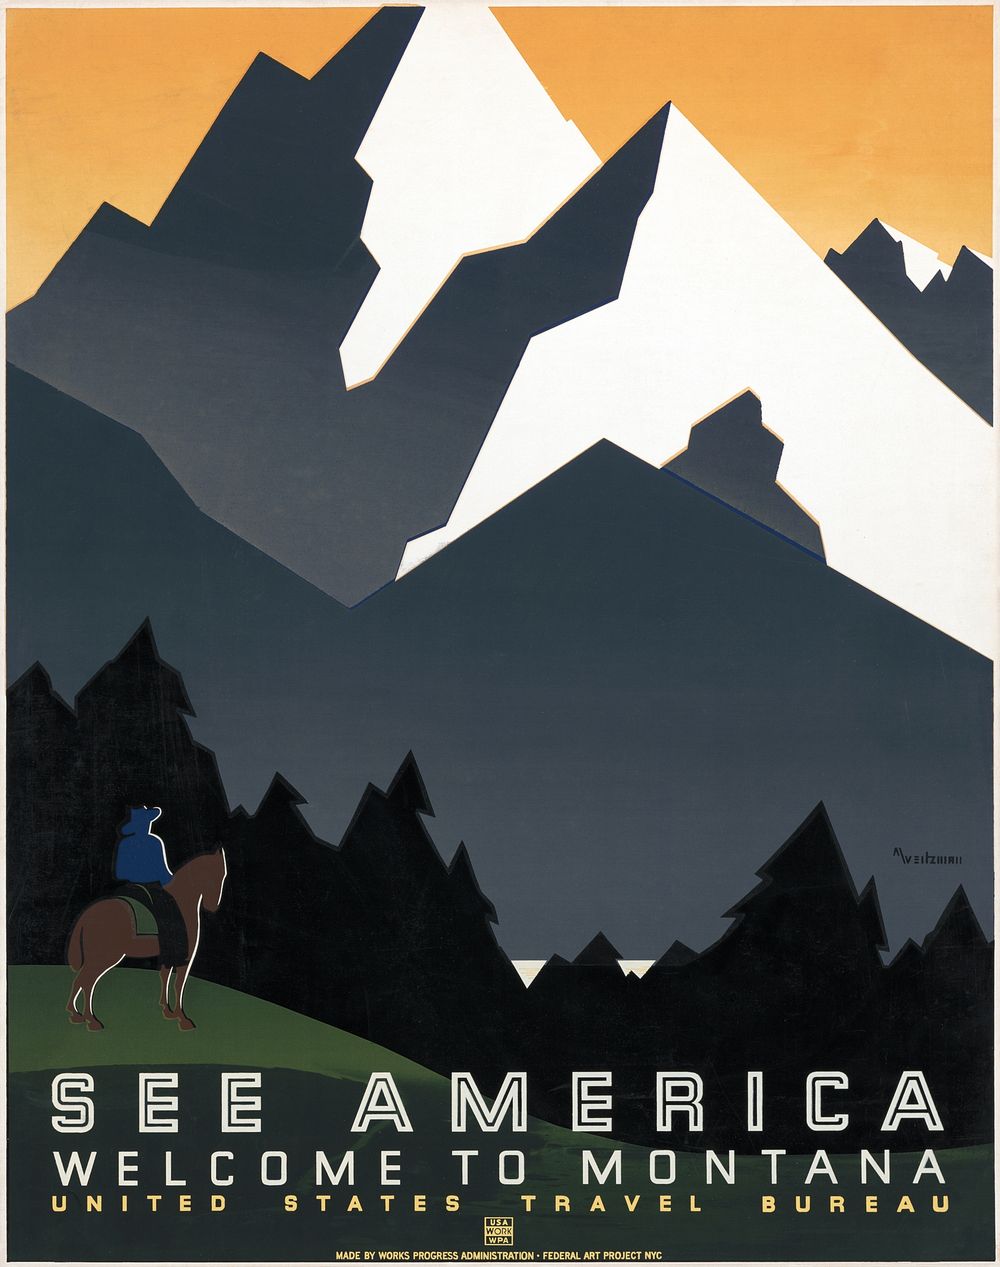 See America. Welcome to Montana (1936) travel poster by Martin Weitzman. Original public domain image from the Library of…